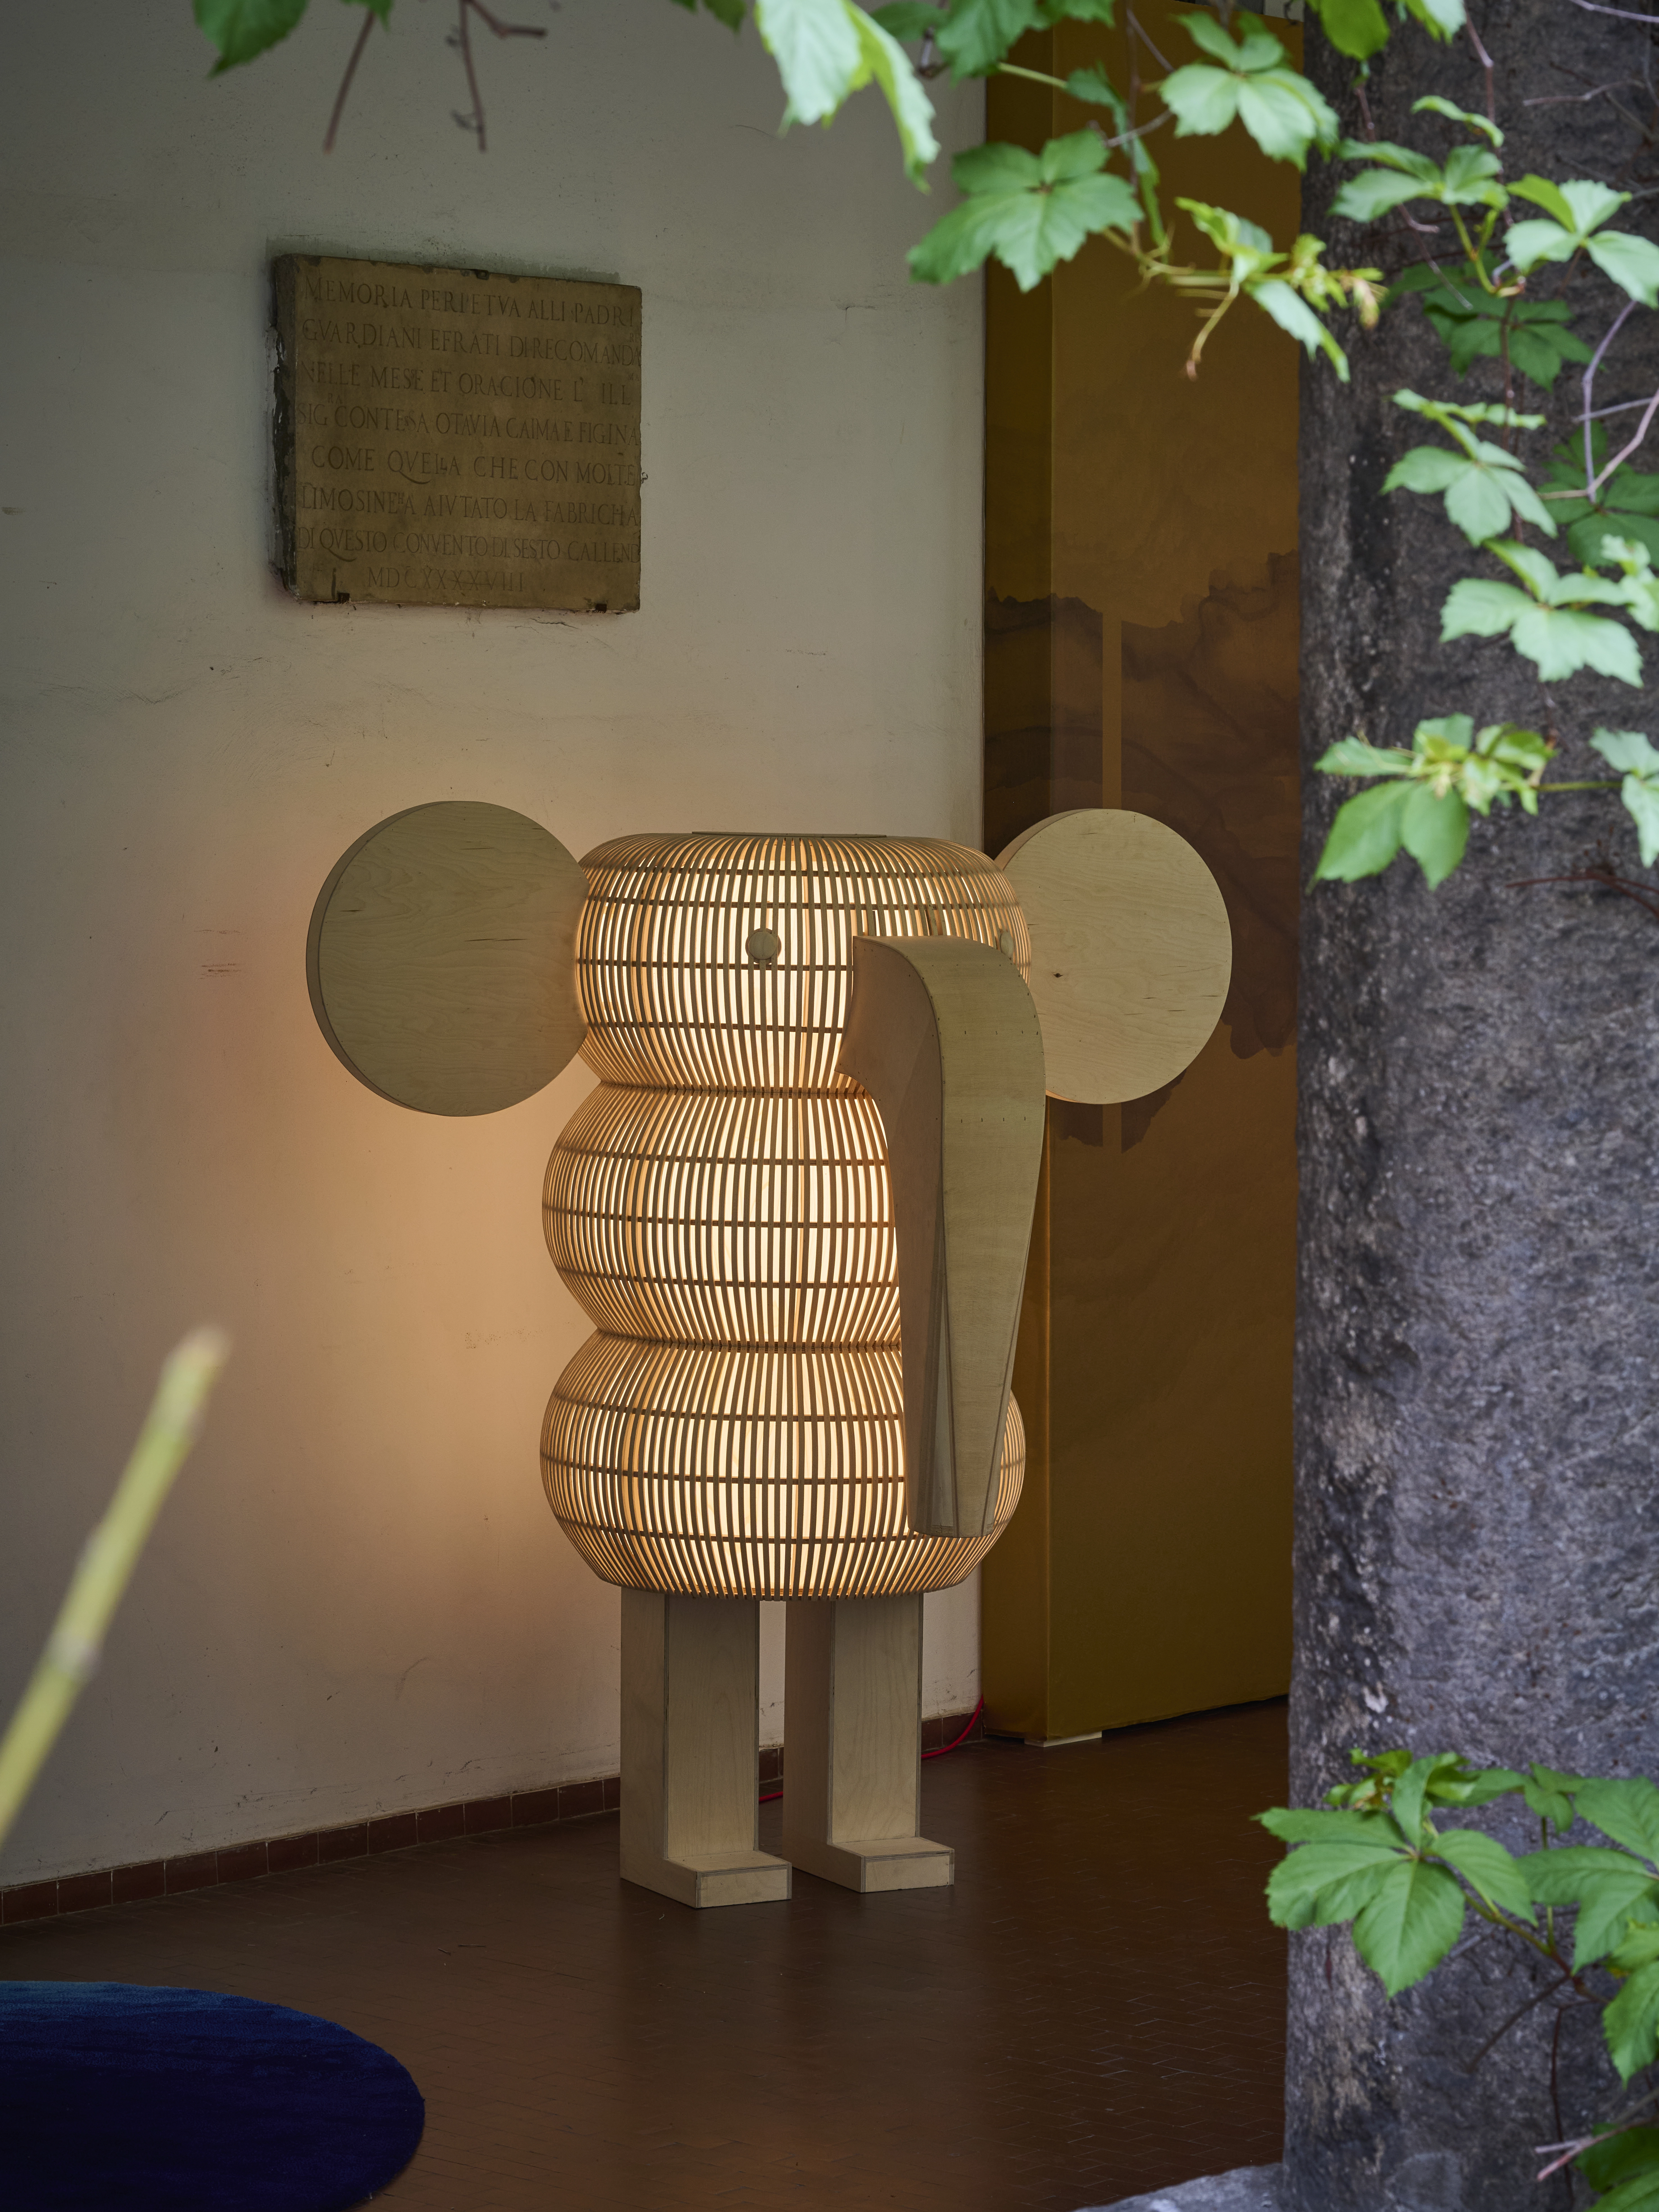 The main character of the image is the floor lamp "Smelly Fant" designed by Isidro Ferrer and Mariví Calvo. It is a luminous sculpture of 1,63 high with the shape of an elephant.